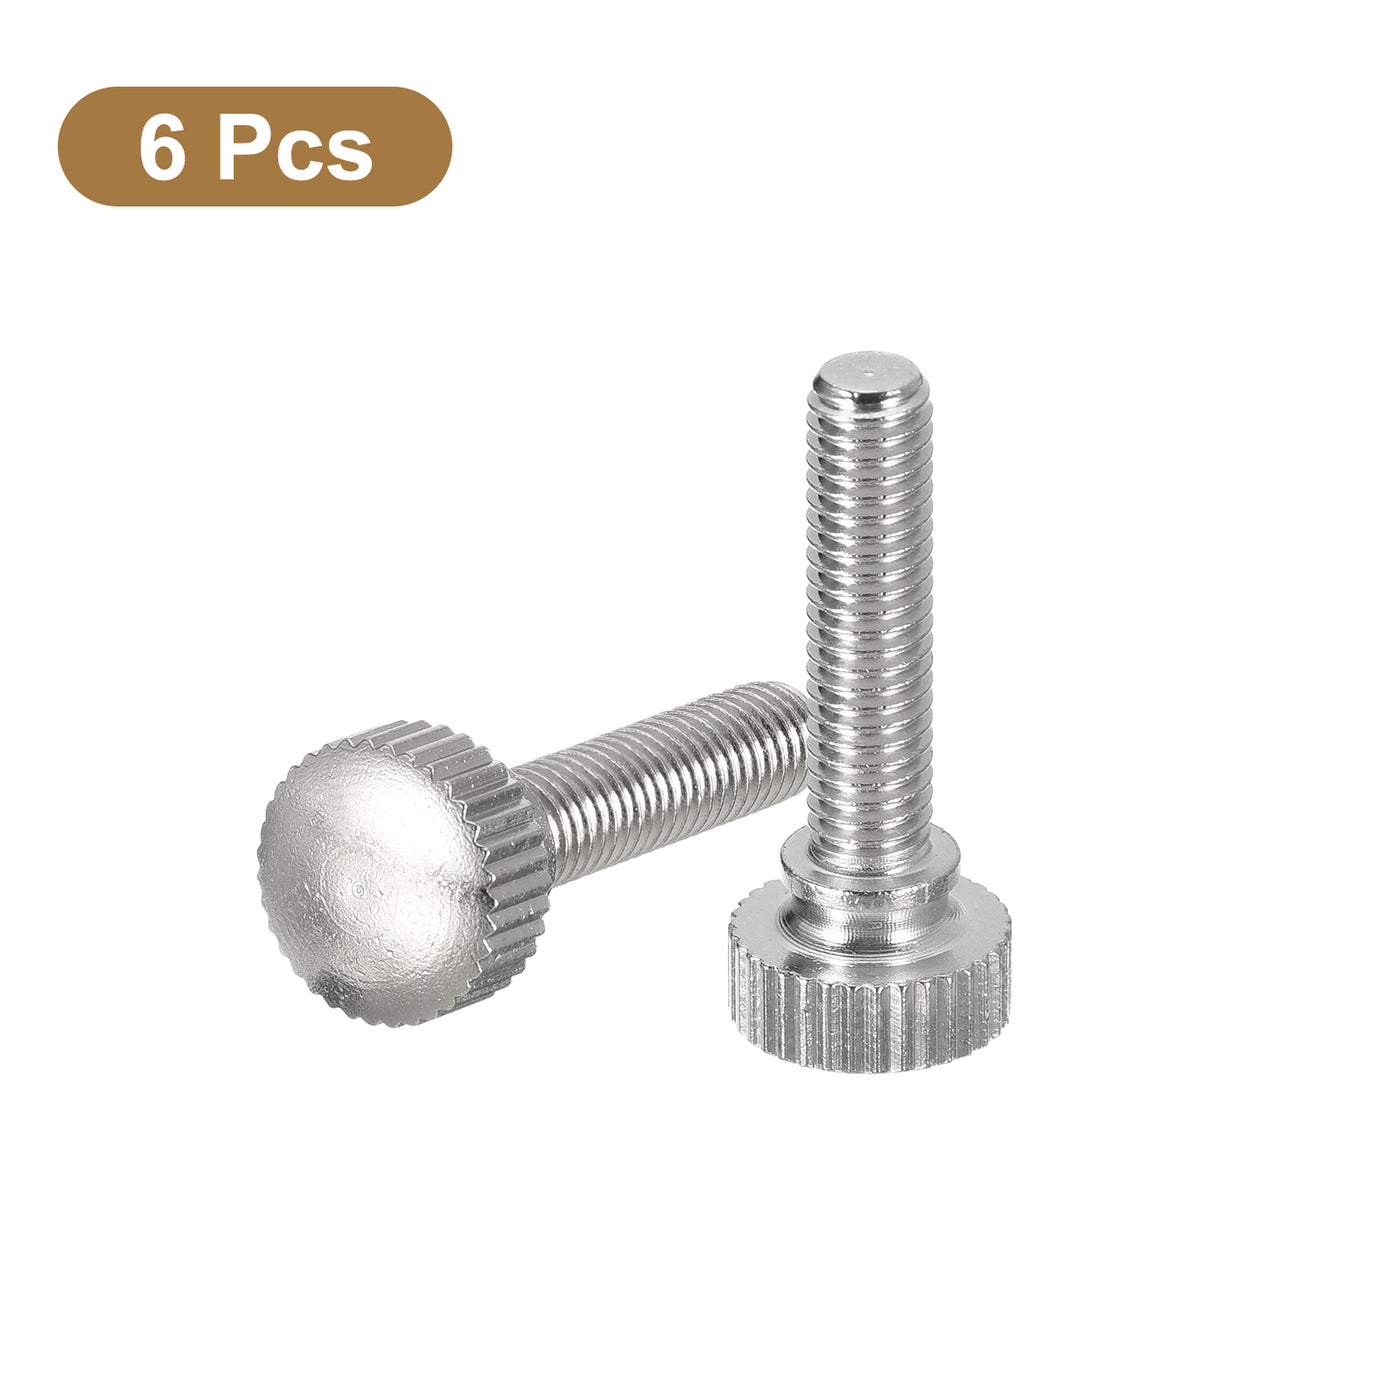 uxcell Uxcell M5x20mm Knurled Thumb Screws, 6pcs Brass Thumb Screws with Shoulder, Silver Tone